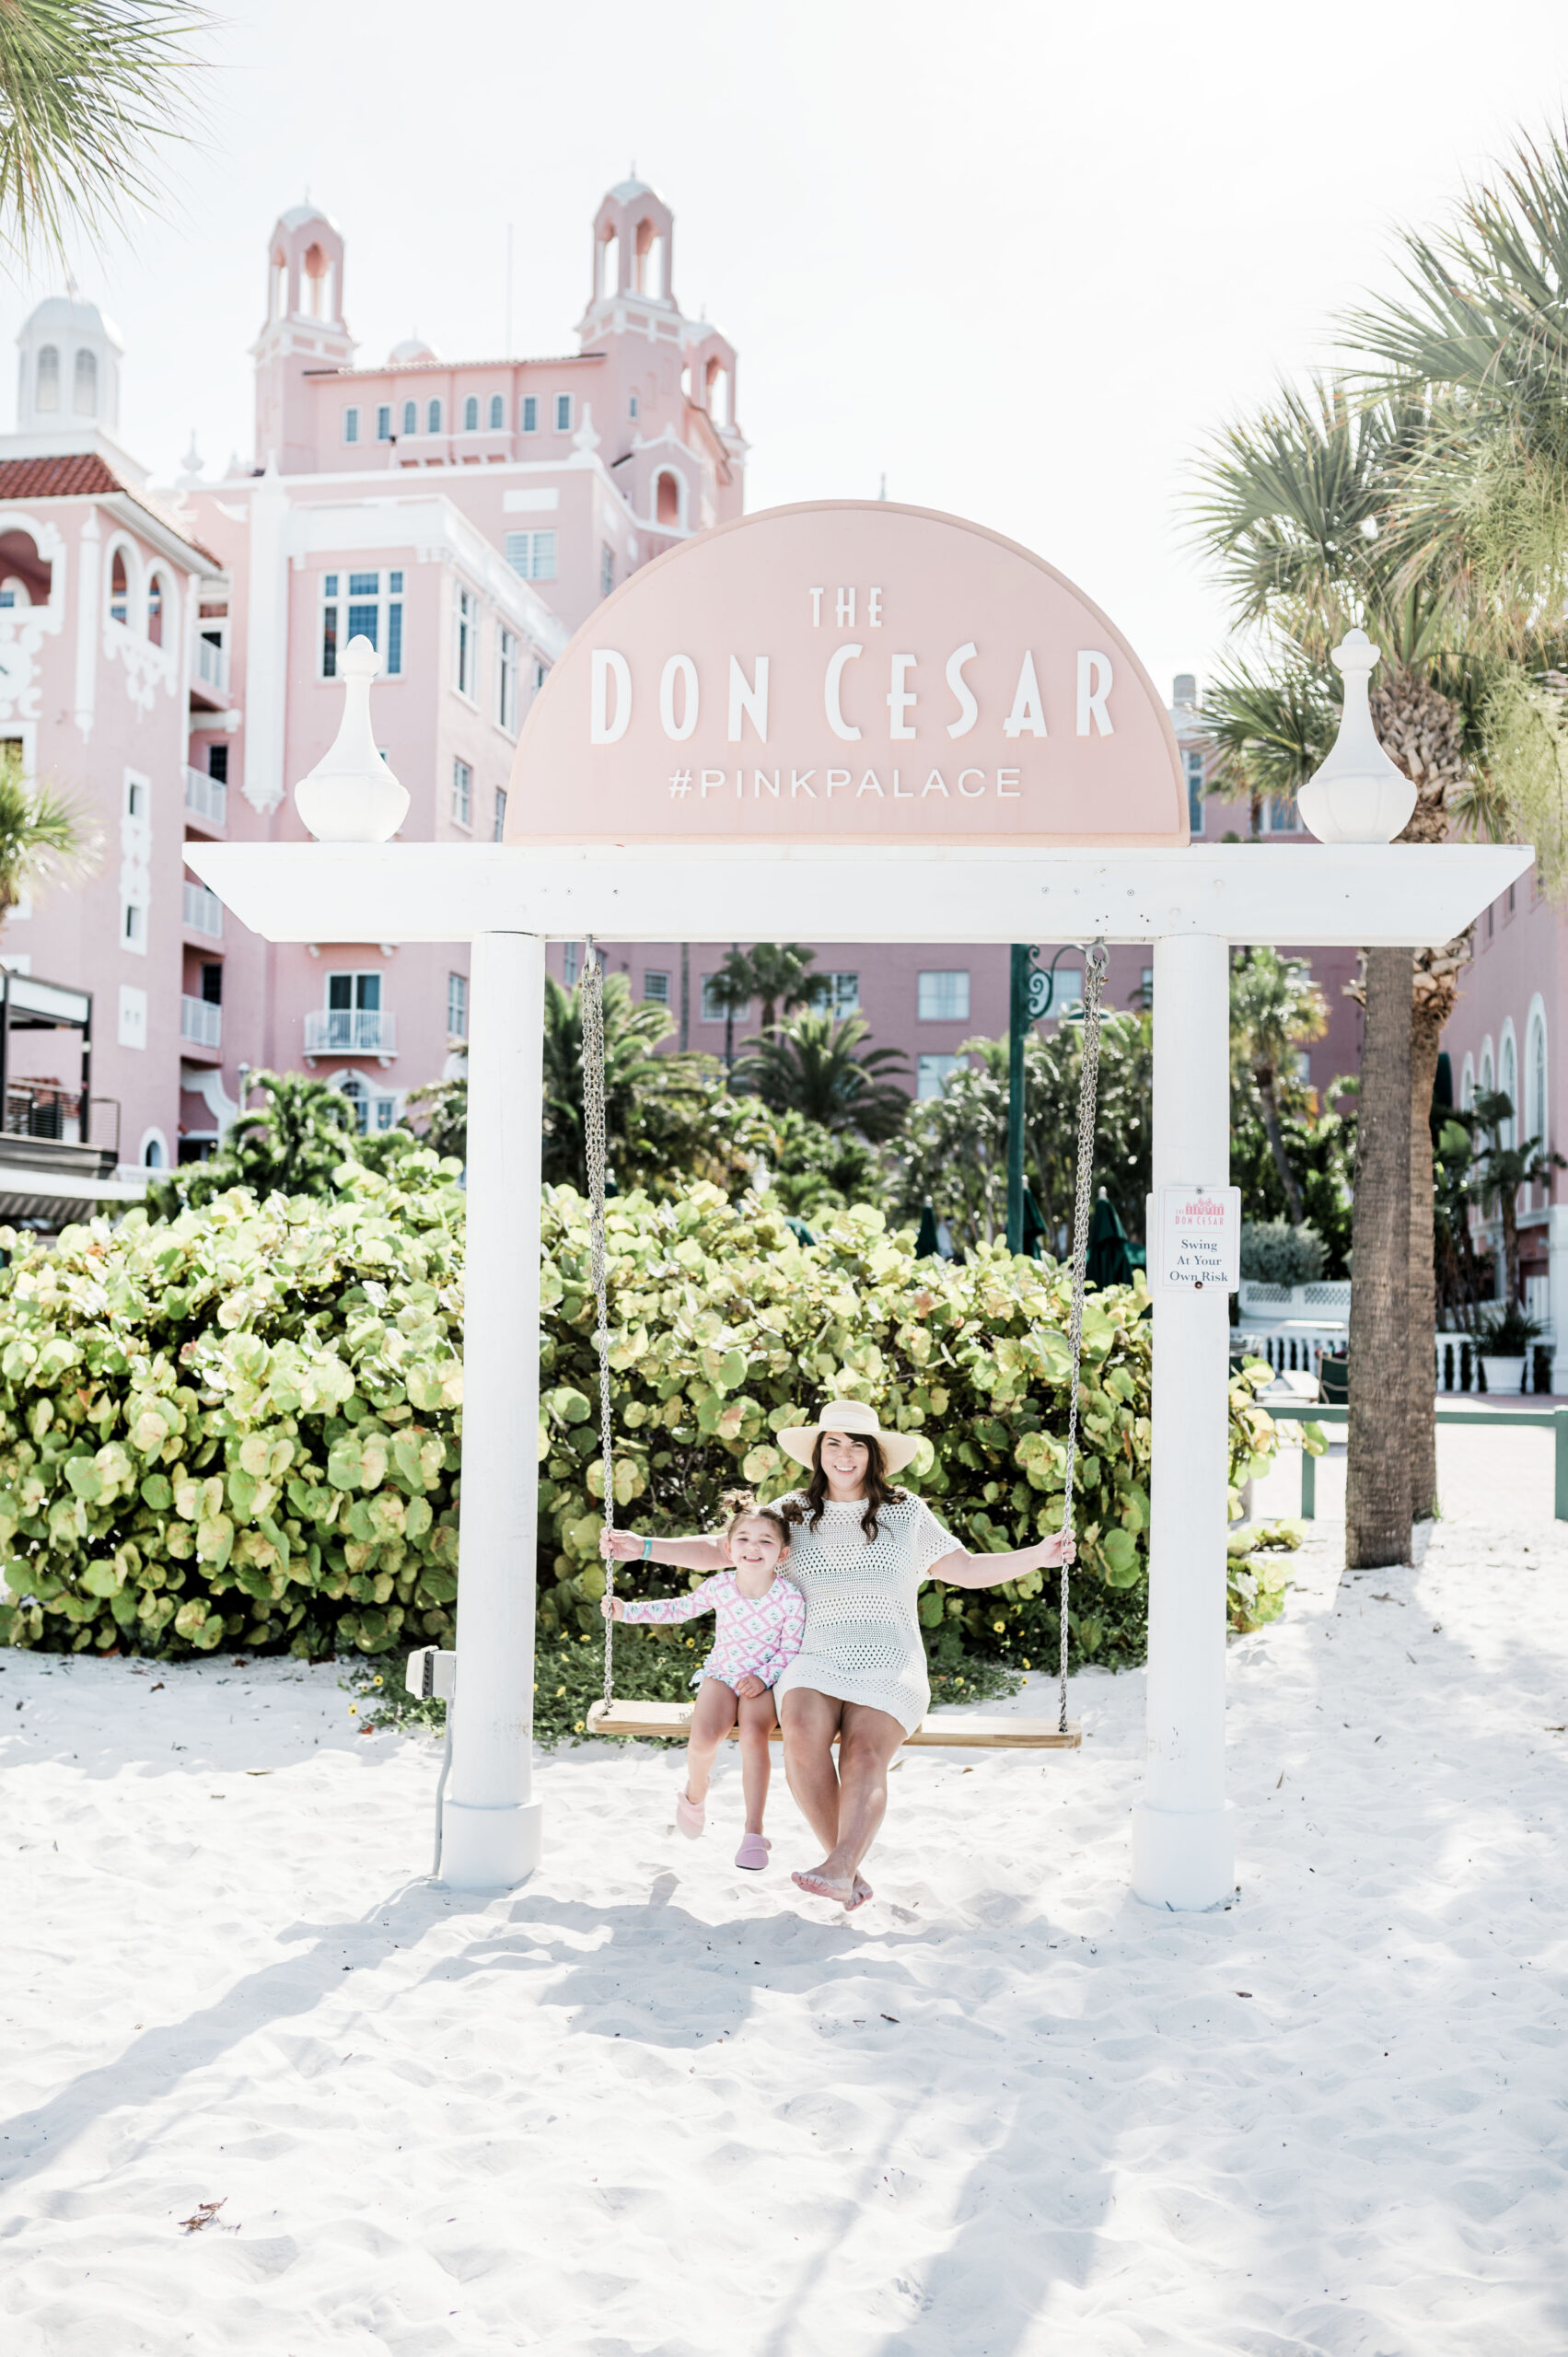 Brittney Naylor and daughter on swing at The Don CeSar hotel in Saint Pete. Instagrammable Hotel in Florida.